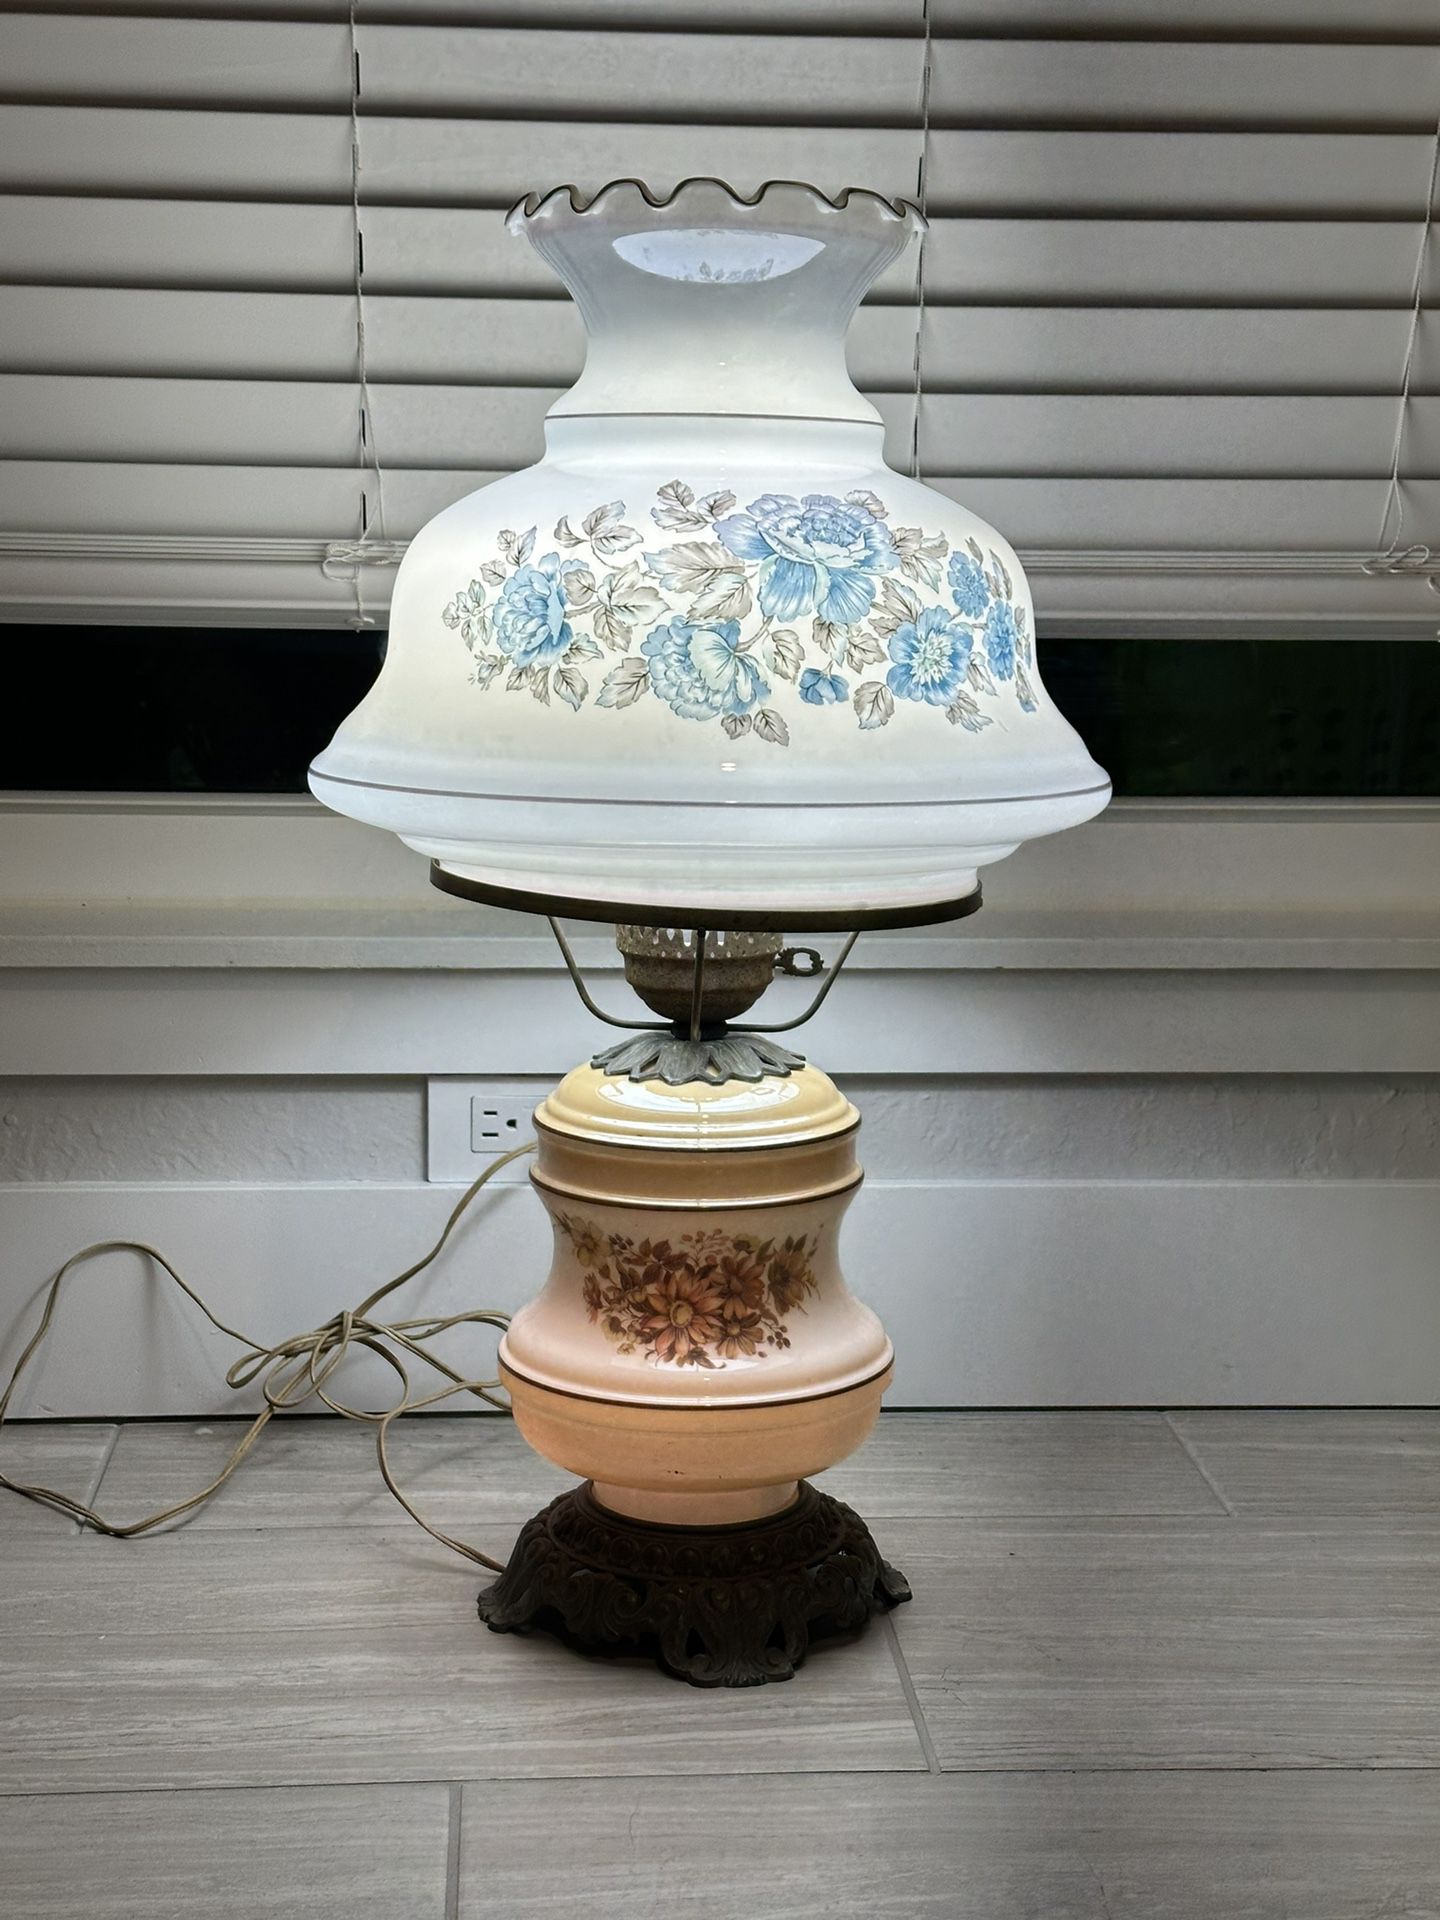 Turn of The Century Beautiful Hurricane Lamp. In its Original Condition. No Chips/Cracks. see below